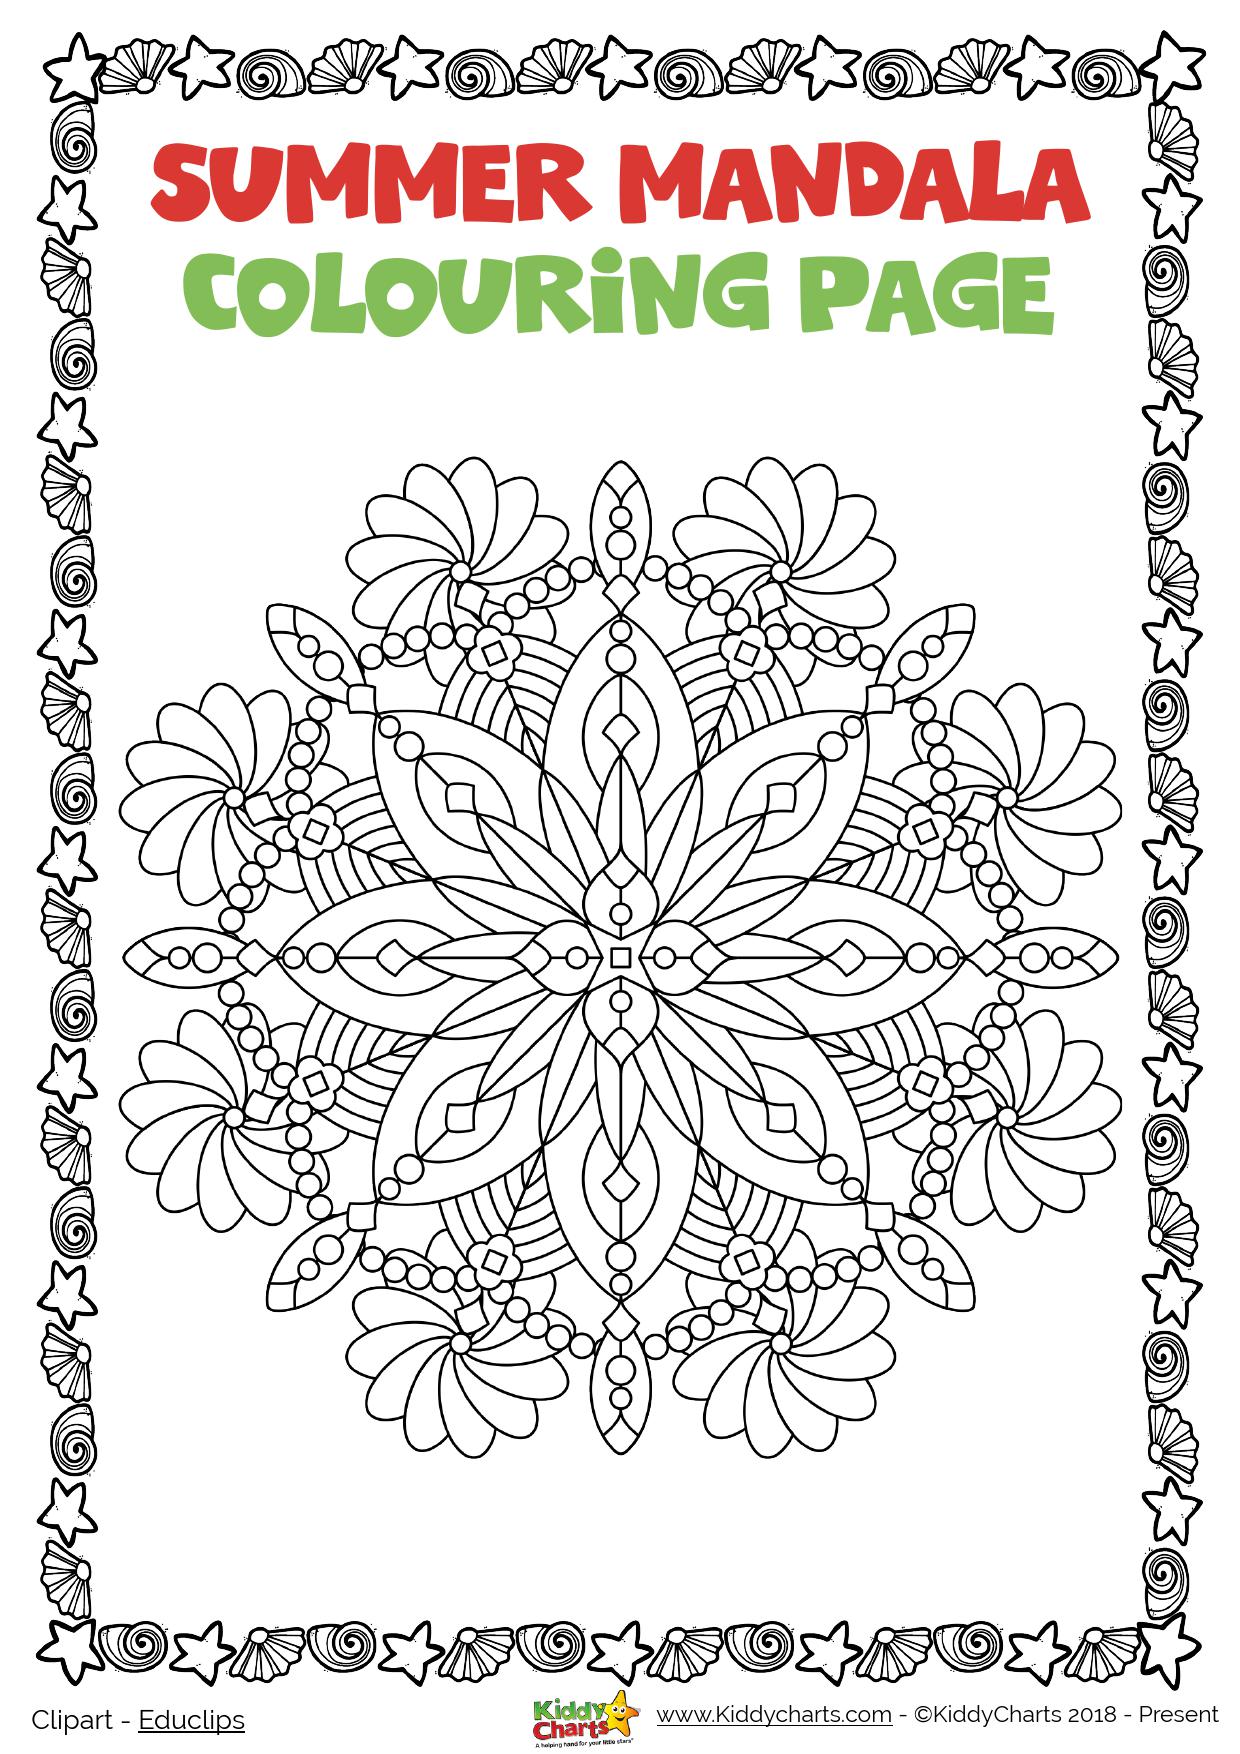 We all love a mandala and here is a gorgeous summer mandala colouring page for you to colour in. Pop over to the site for more fun summer activities and loads of other printables too! #printables #kids #summer